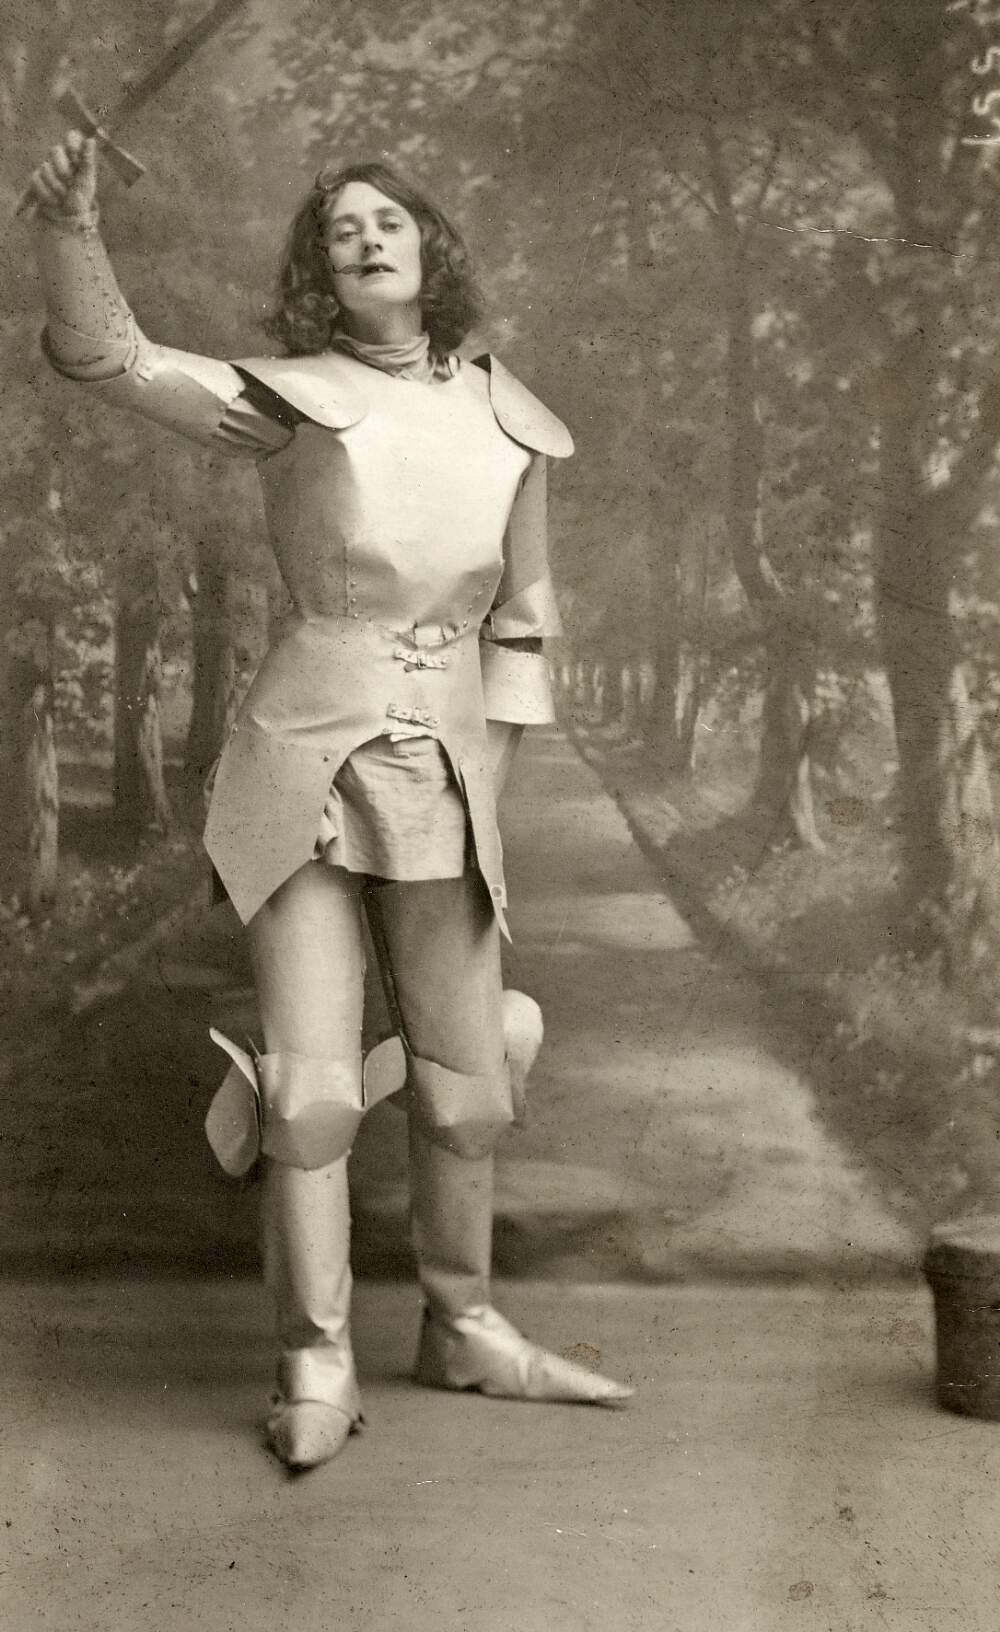 Countess Markievicz as Joan of Arc in suffrage pageant, Photo by Roe McMahon, 1914. Courtesy of the National Library of Ireland.